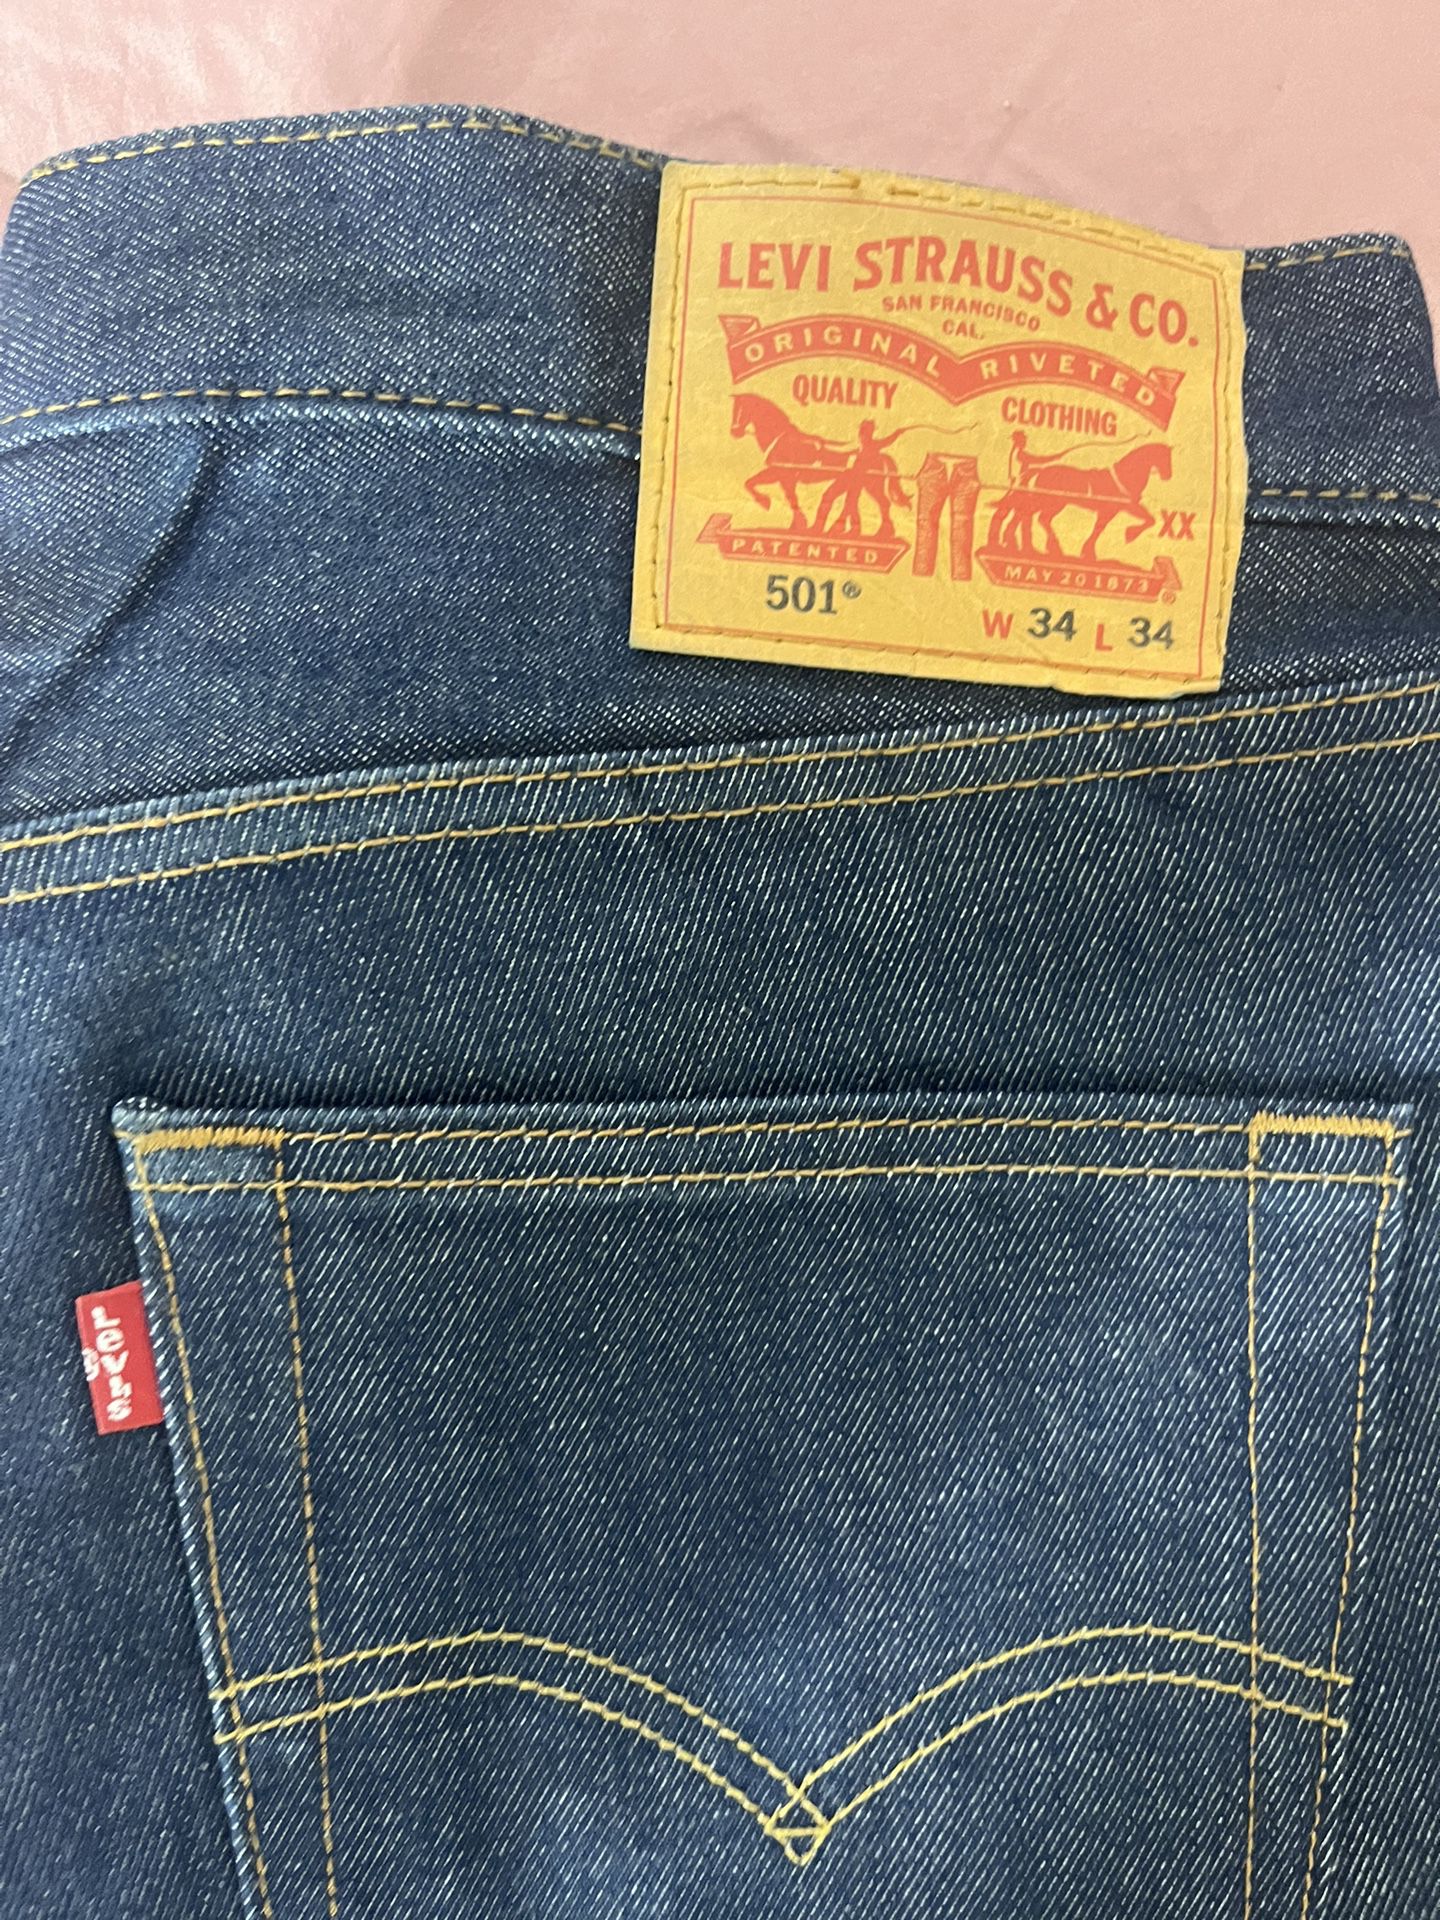 Levi’s 501 for Sale in Mesa, AZ - OfferUp